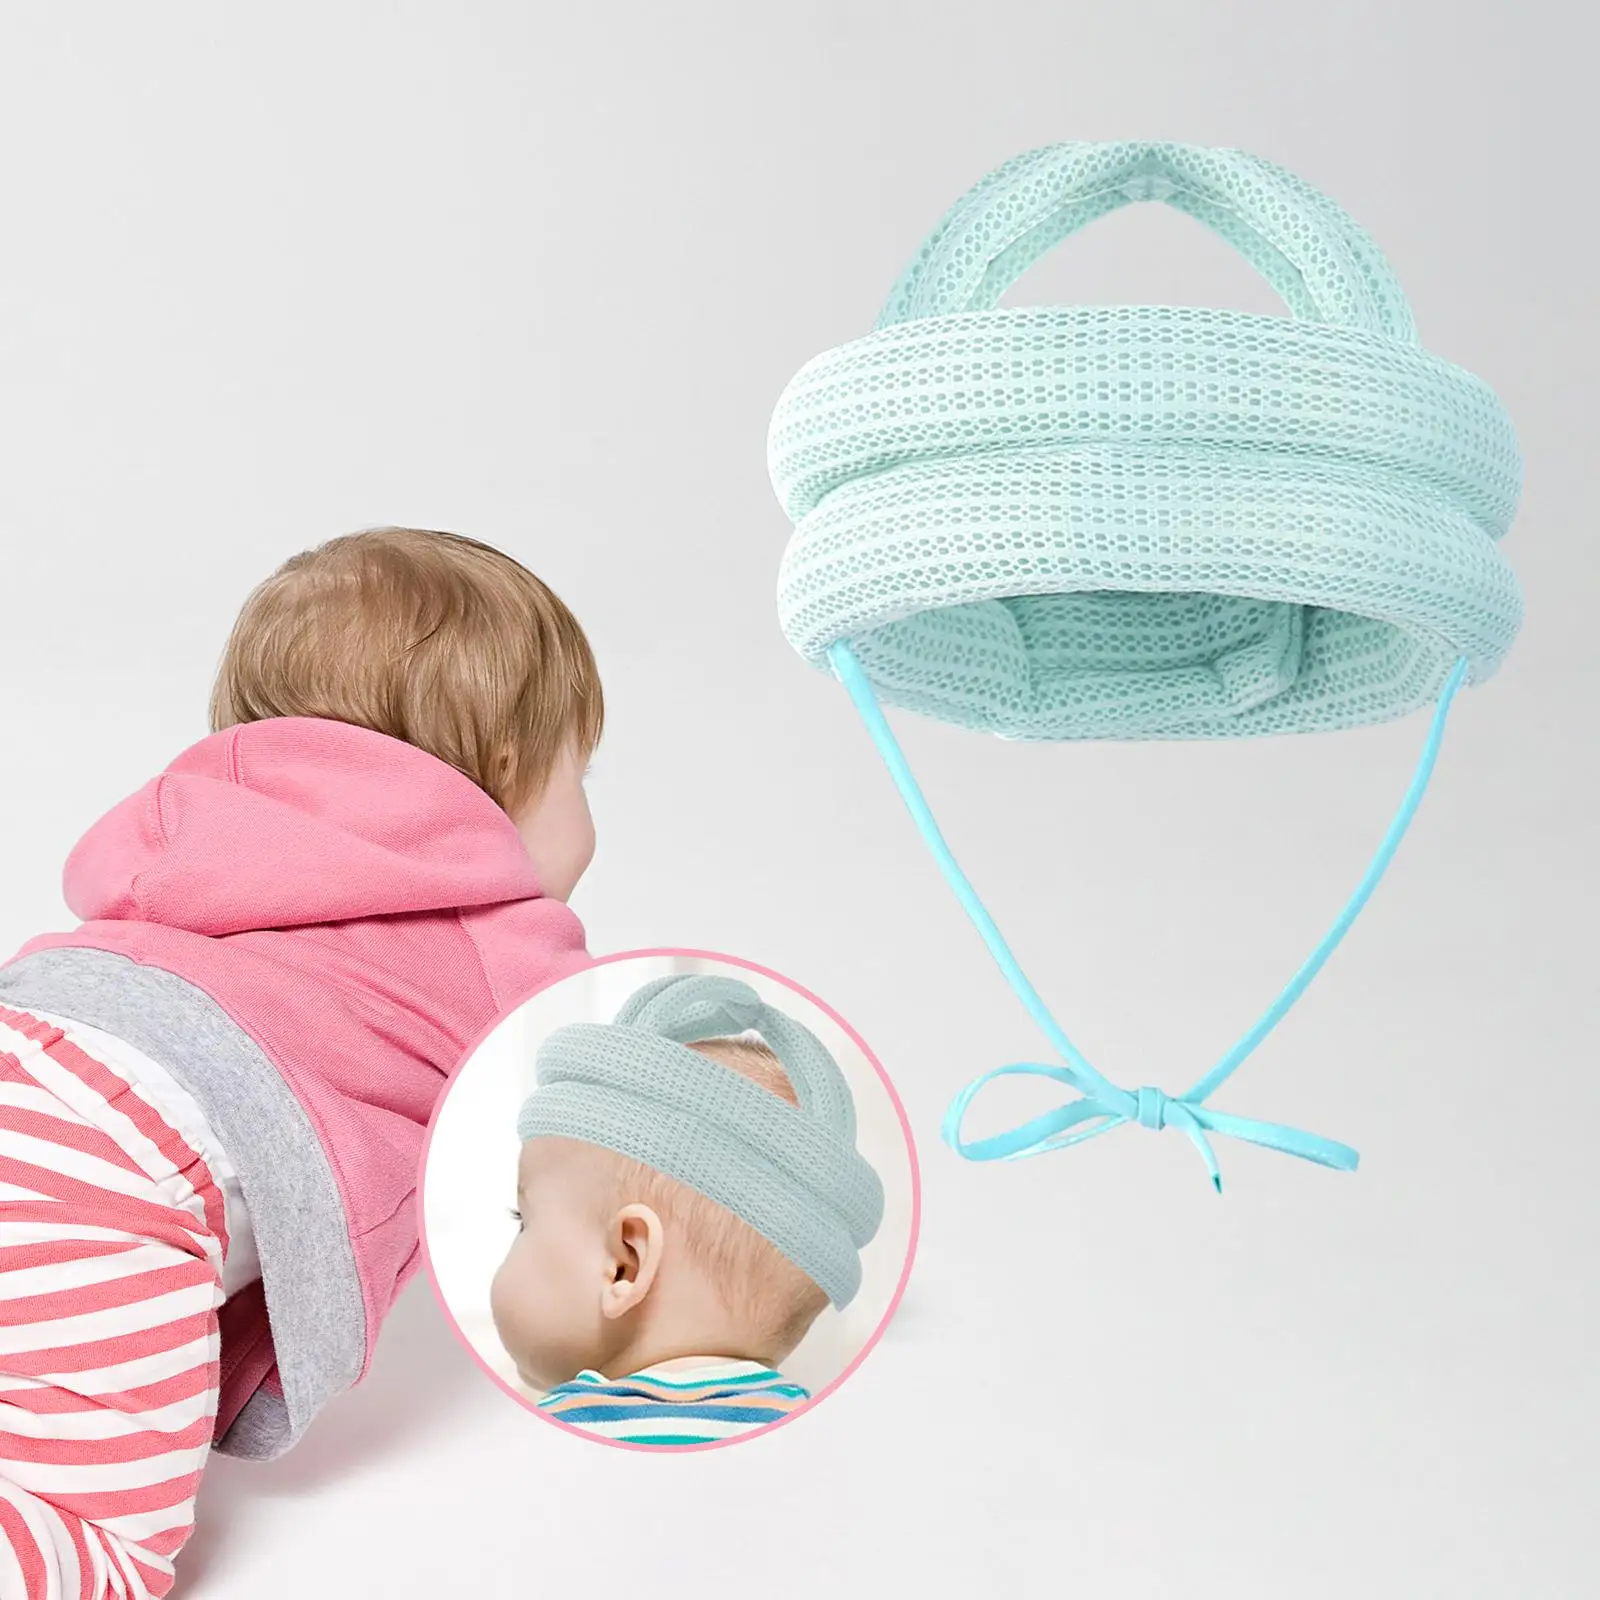 Infant Head Protective Hat Protective Harnesses Cap for Infant Kids Playing